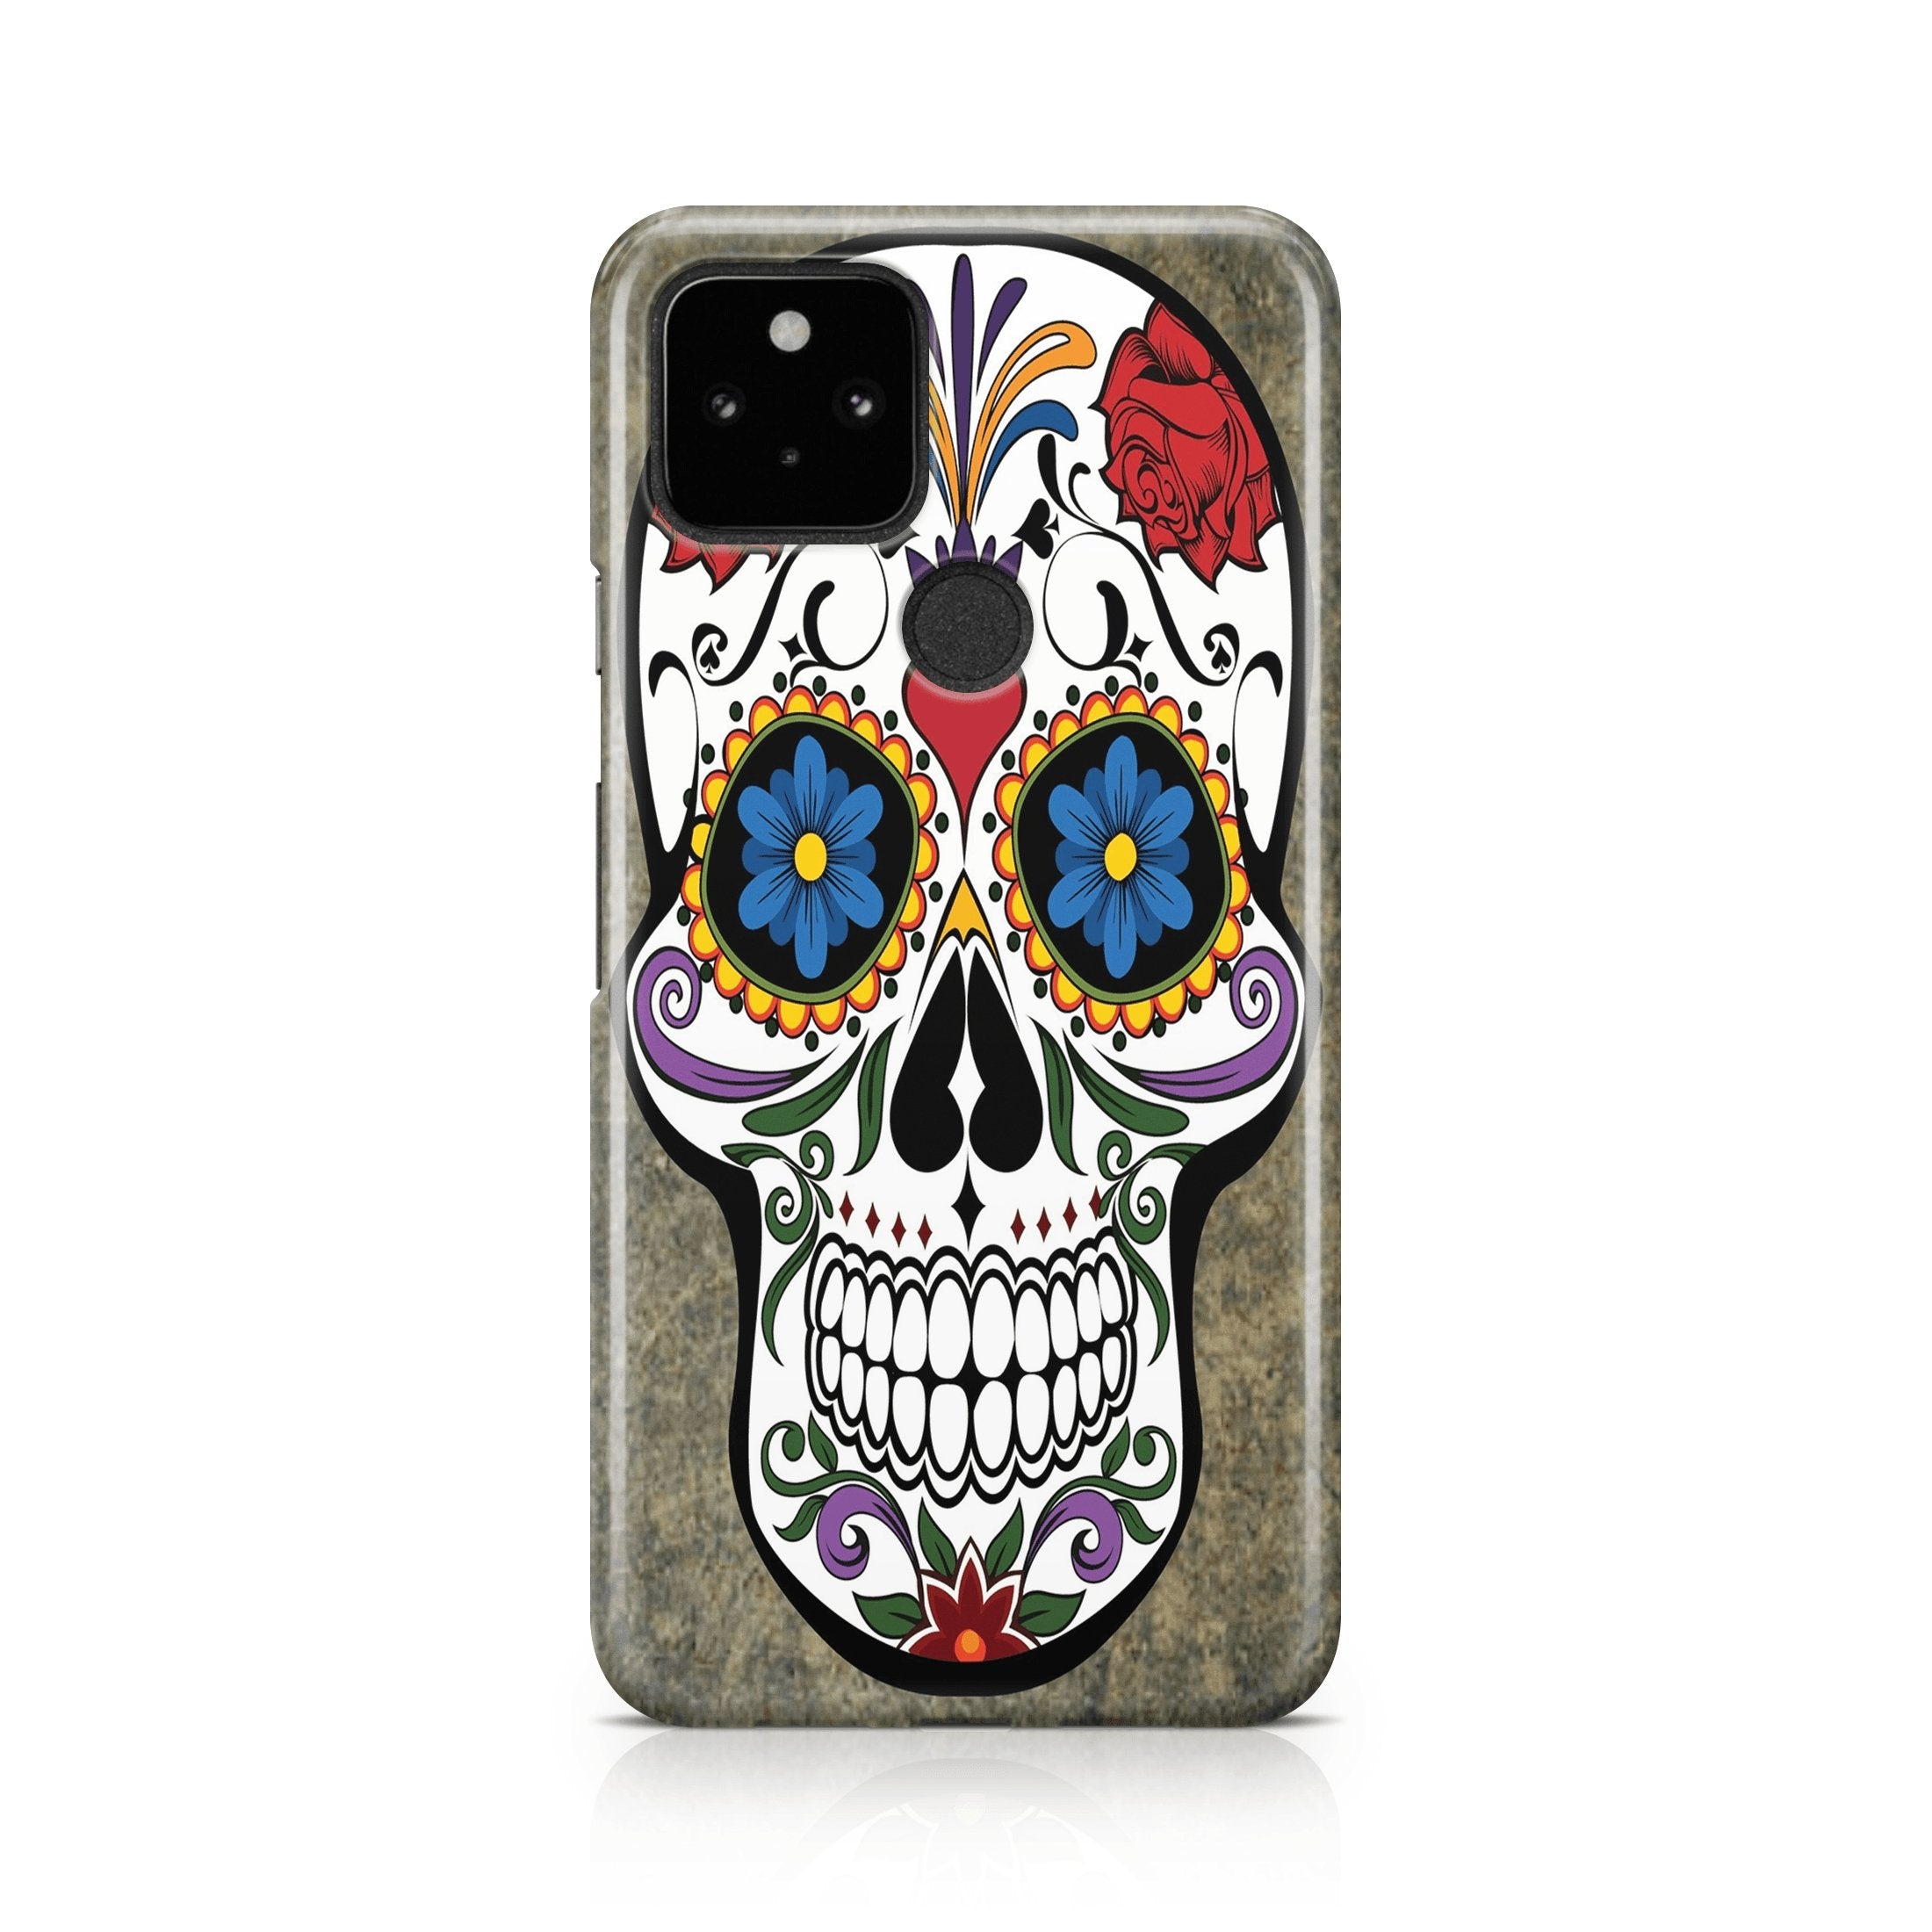 Voodoo Lover - Google phone case designs by CaseSwagger